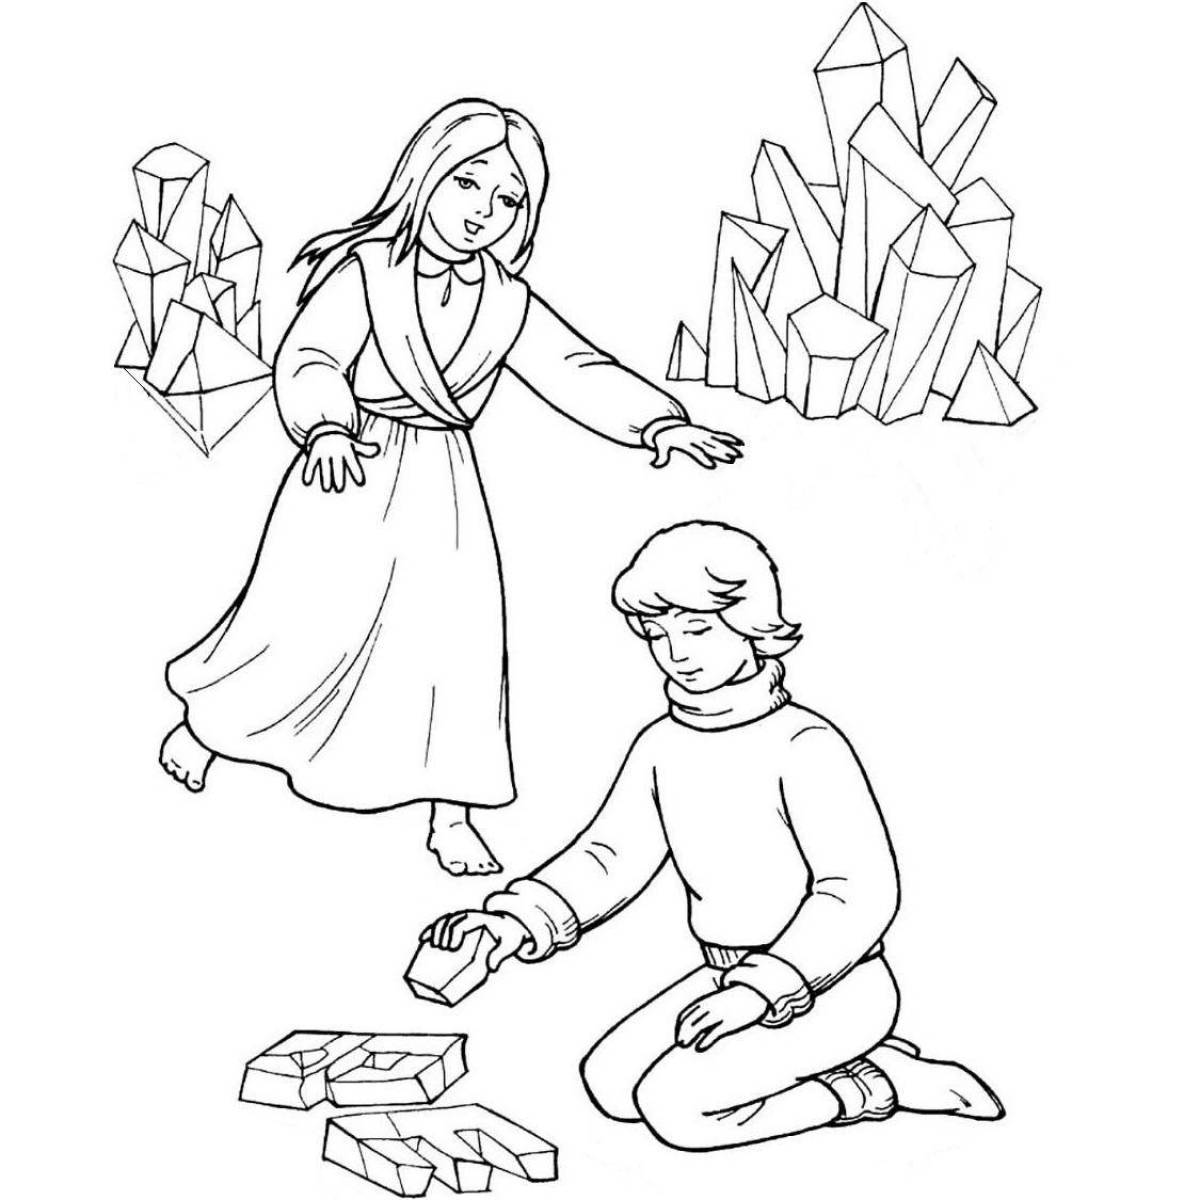 Gerda's charming coloring book of the snow queen